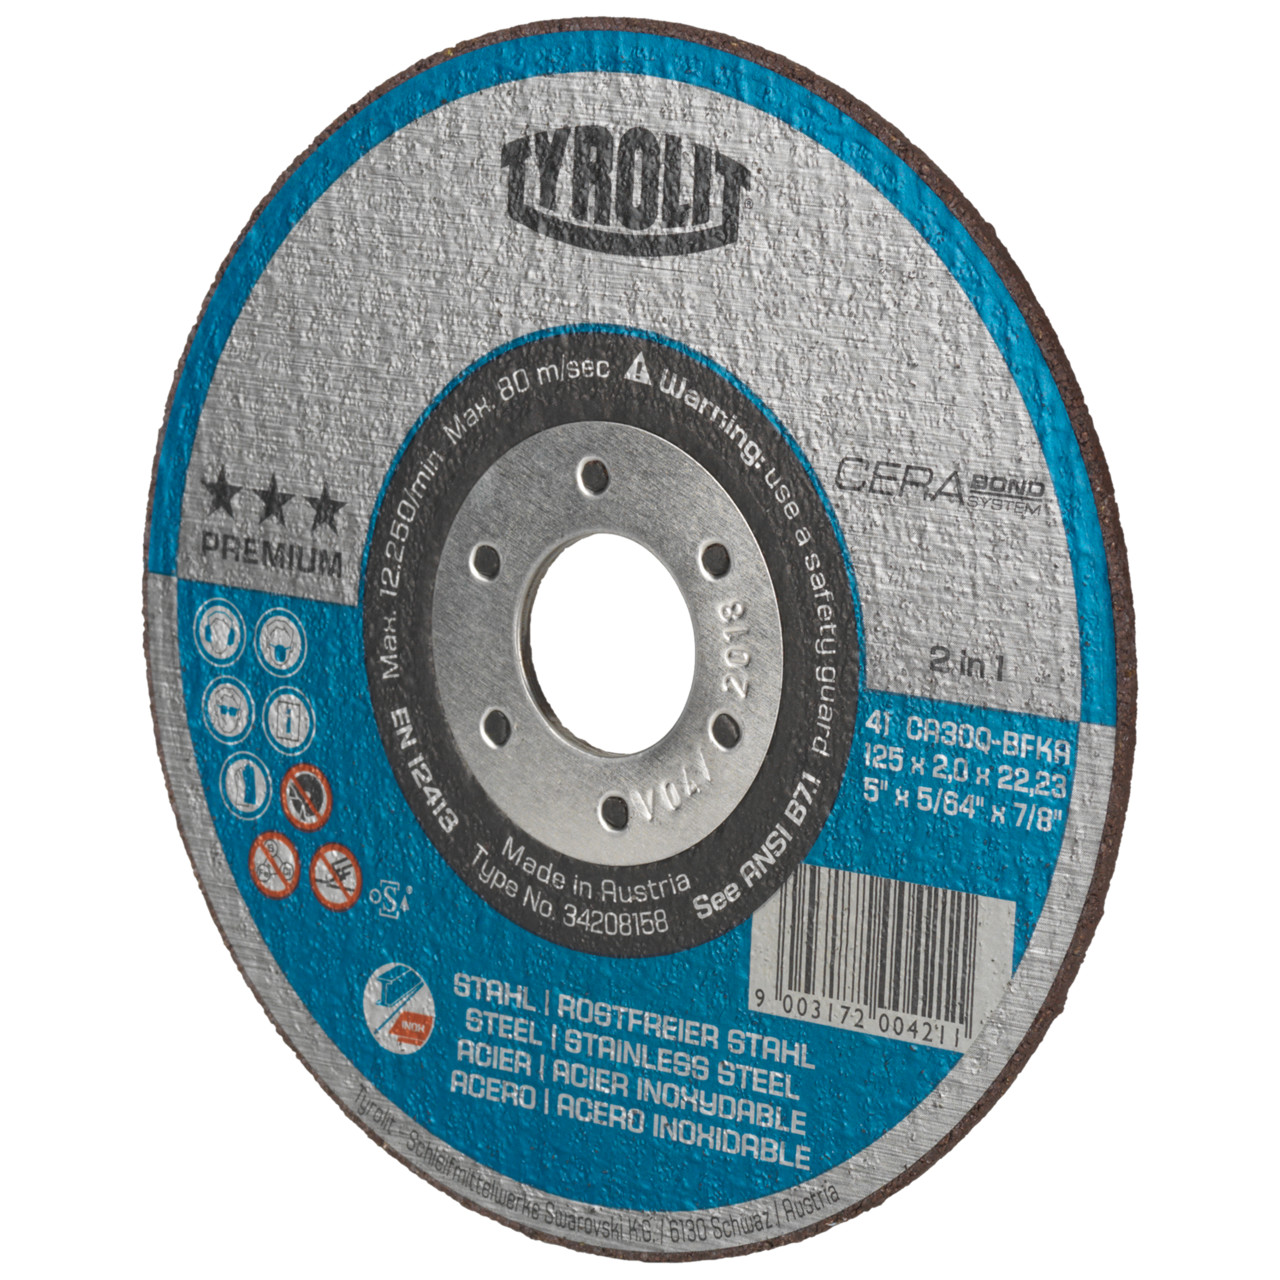 TYROLIT CERABOND Cutting disc DxDxH 150x1.3x22.23 2in1 for steel and stainless steel, shape: 41 - straight version, Art. 34256274